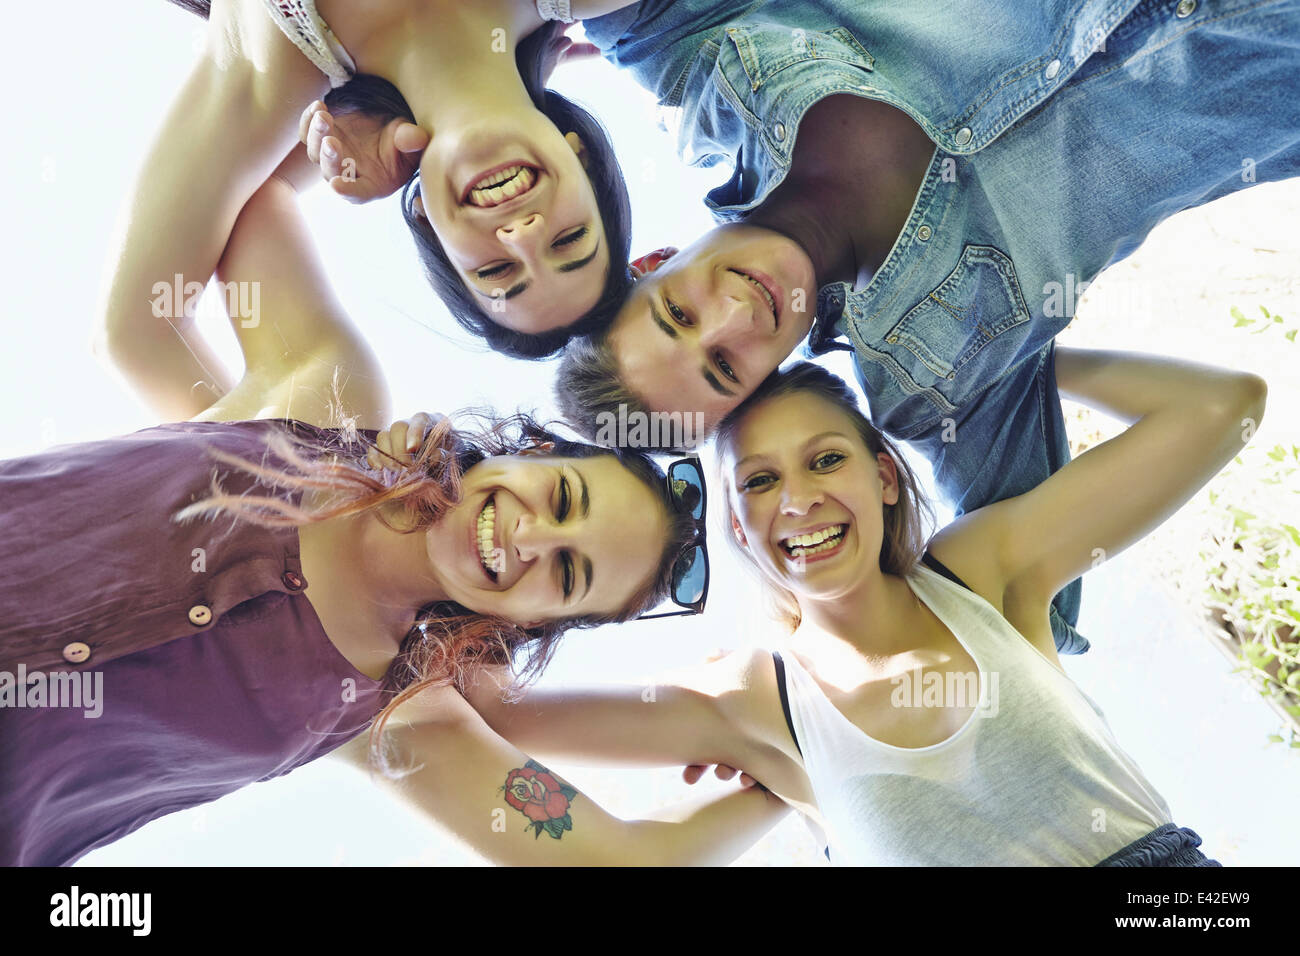 Group of friends in huddle smiling, low angle Stock Photo